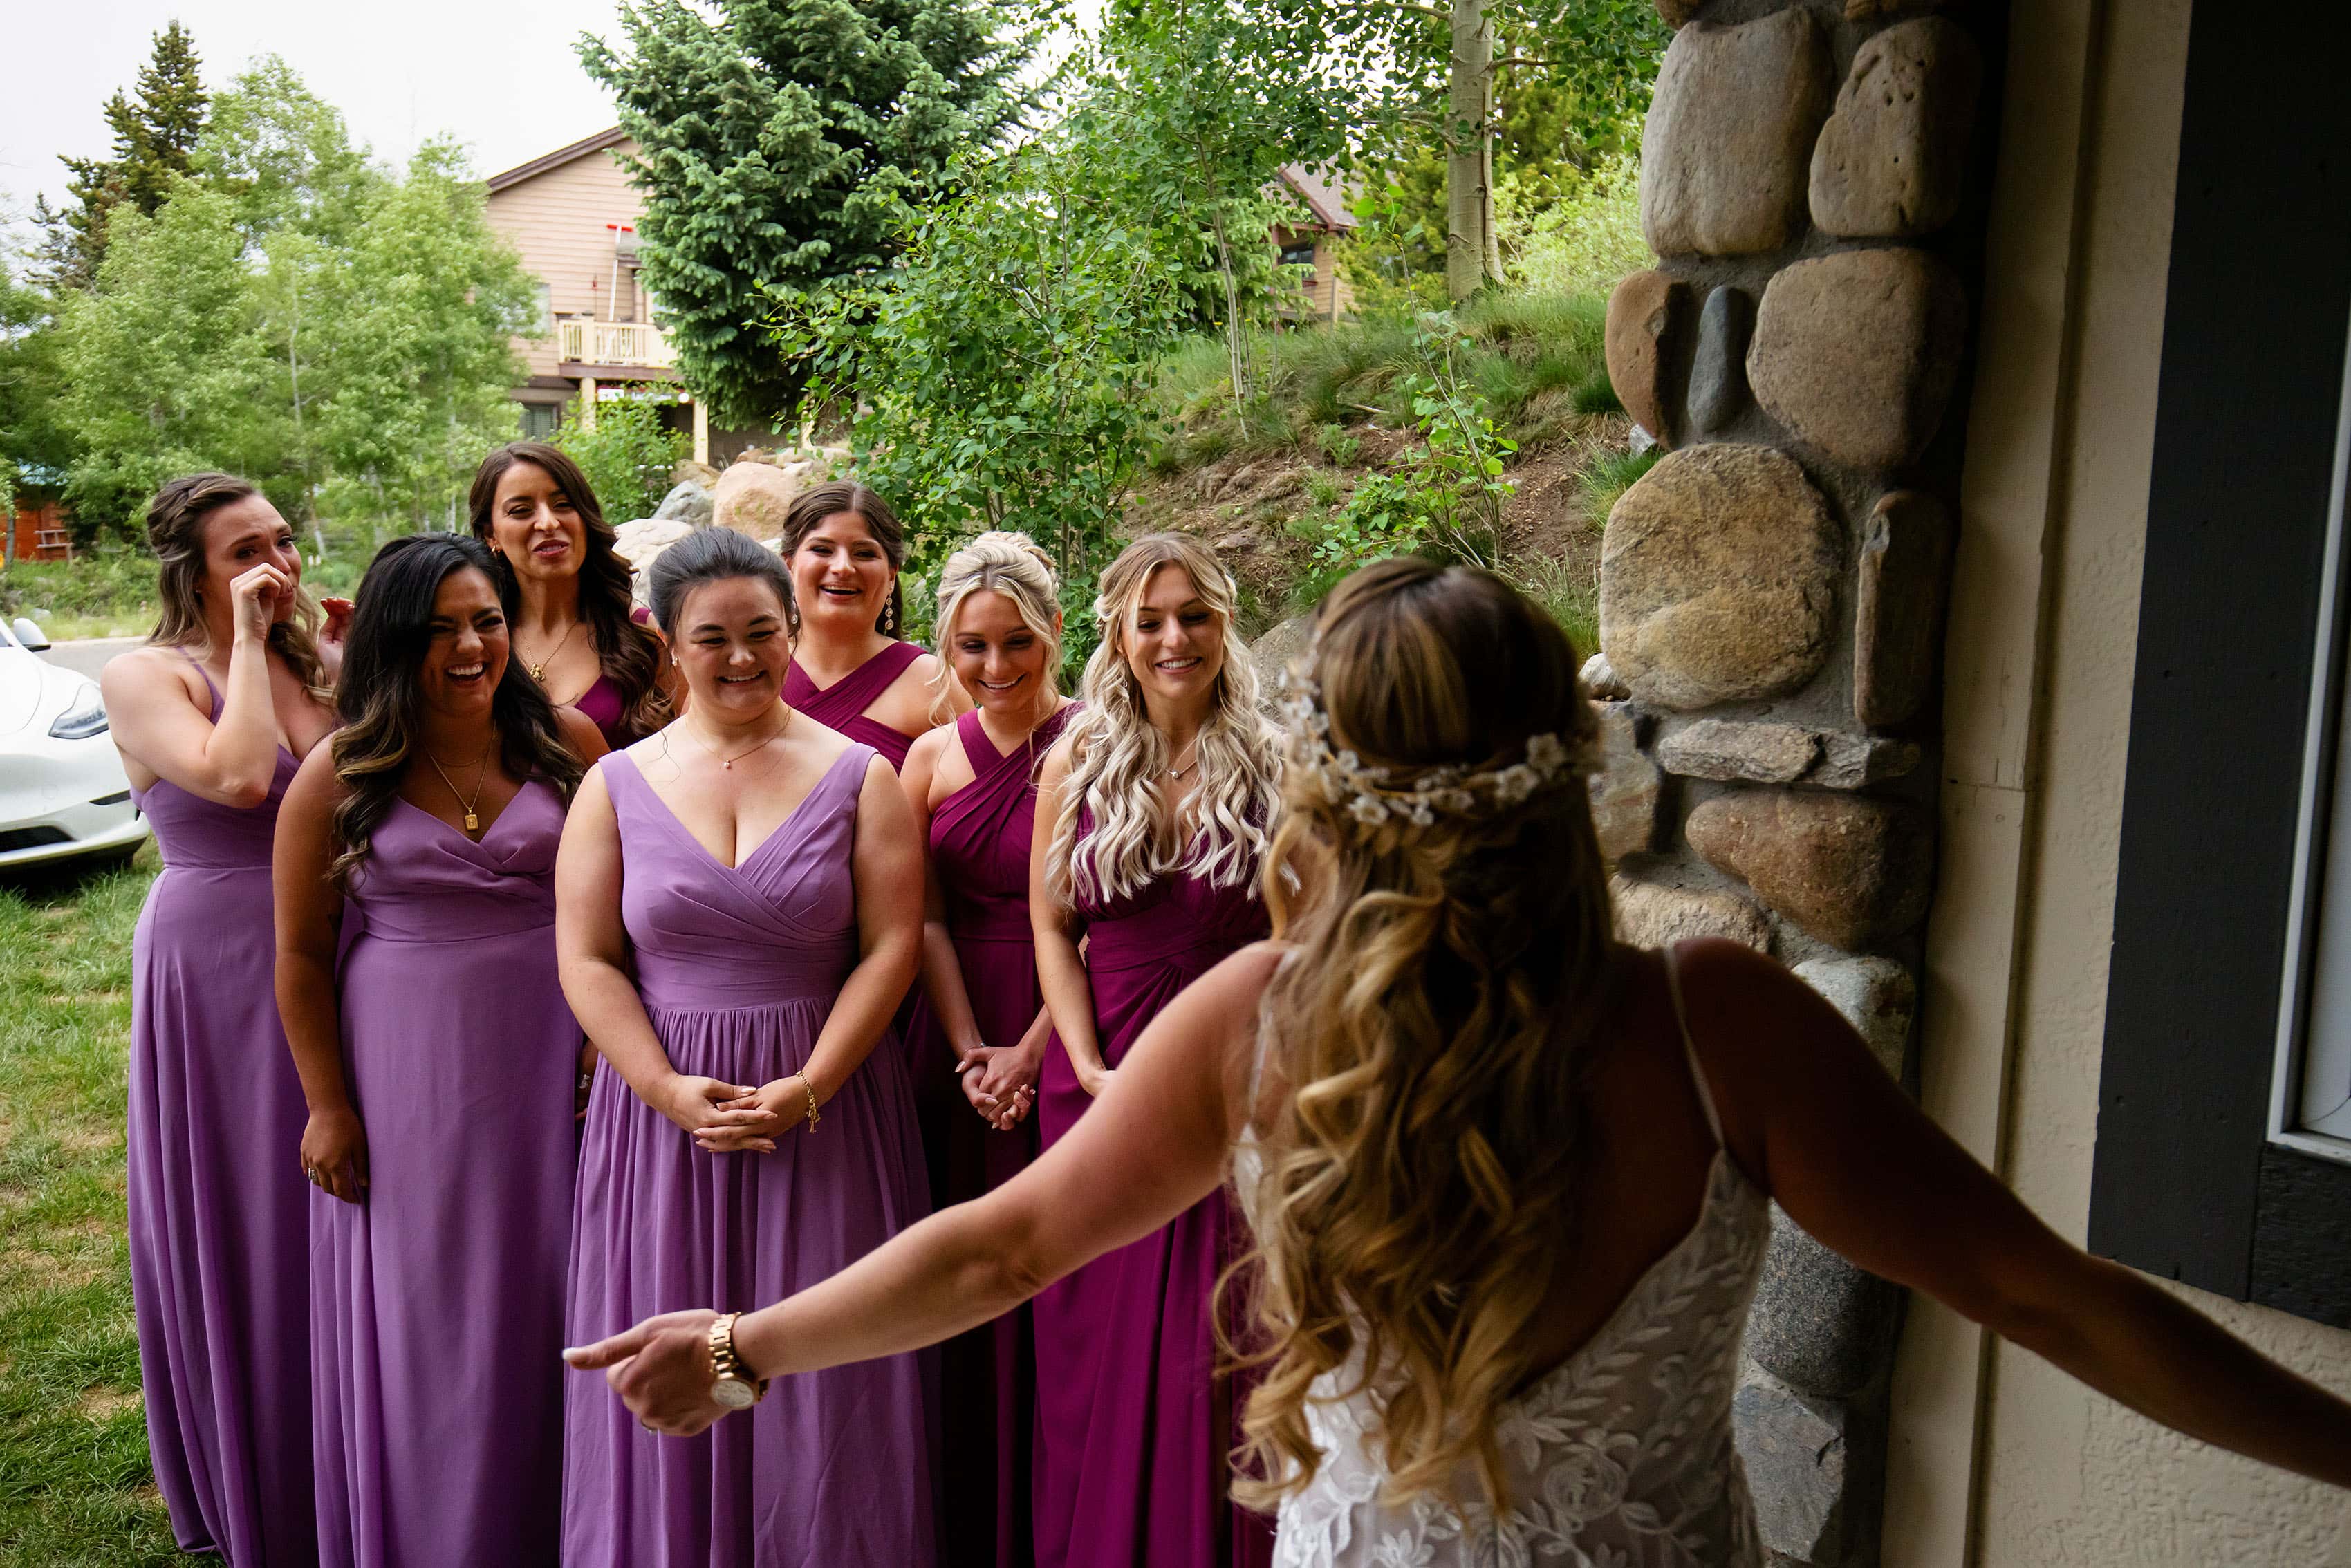 Bridesmaids react to seeing the bride in her dress for the first time